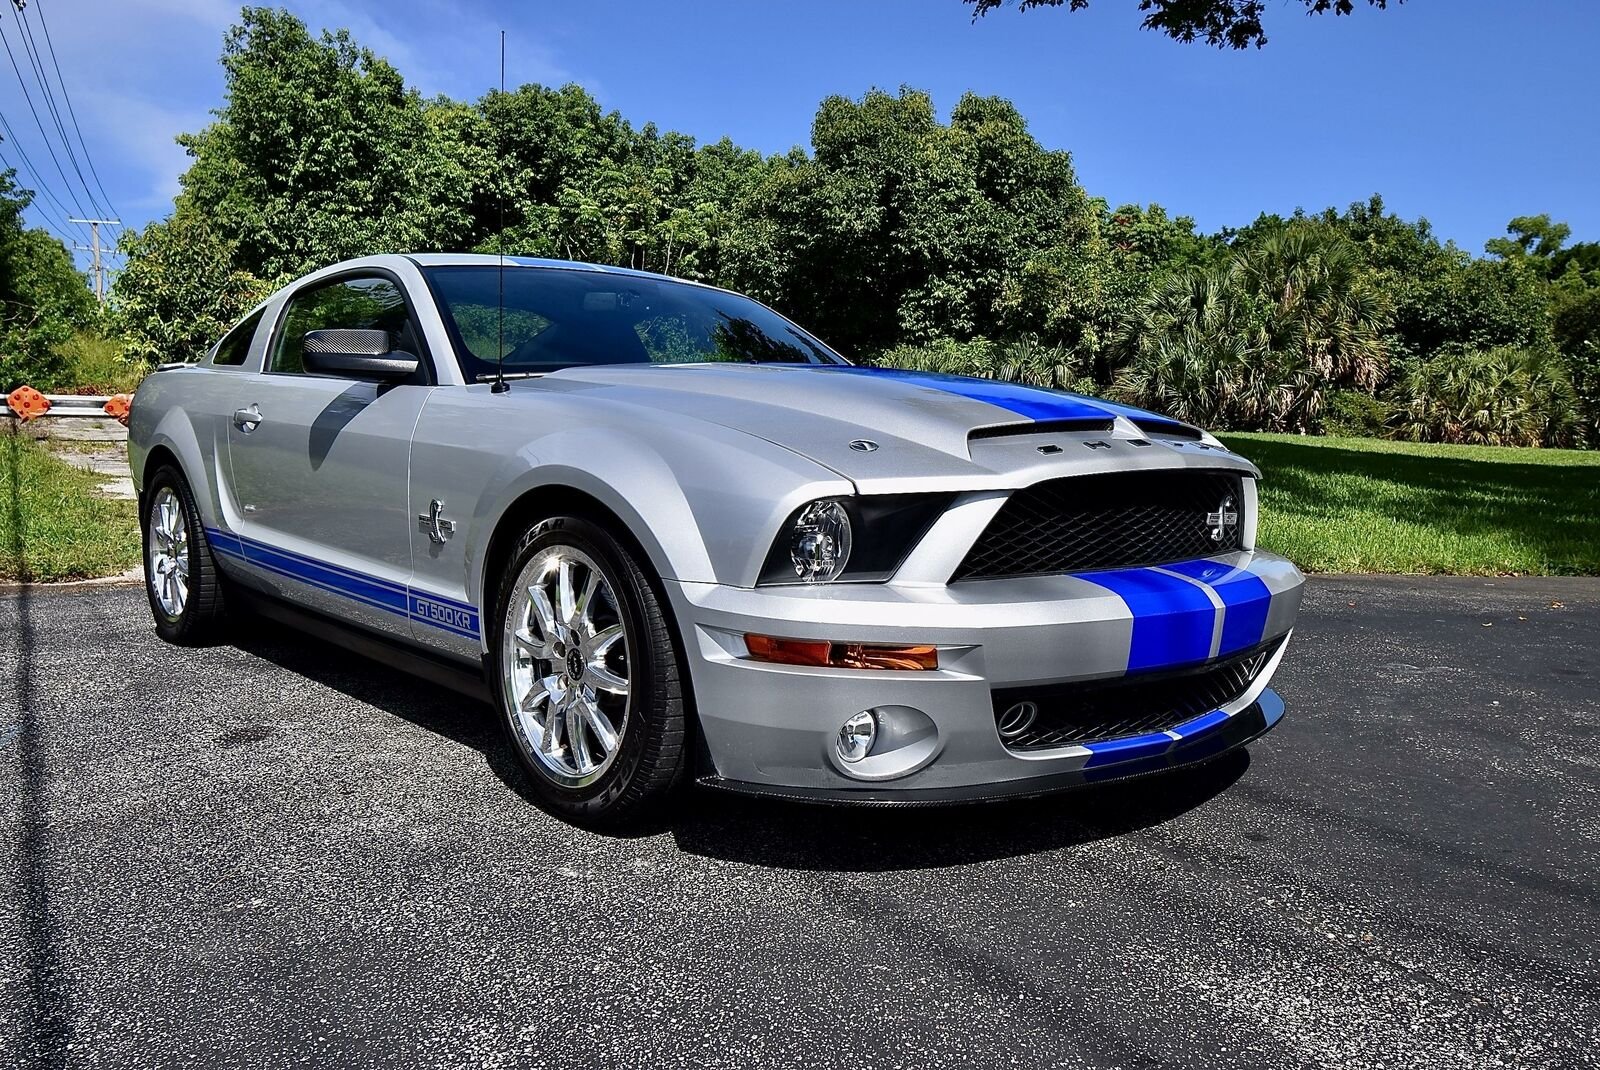 Мустанг 2008. Ford Mustang Shelby gt500kr 2008. Форд Шелби gt 500. Форд Мустанг Шелби 2008. Форд Шелби gt 500 2008.